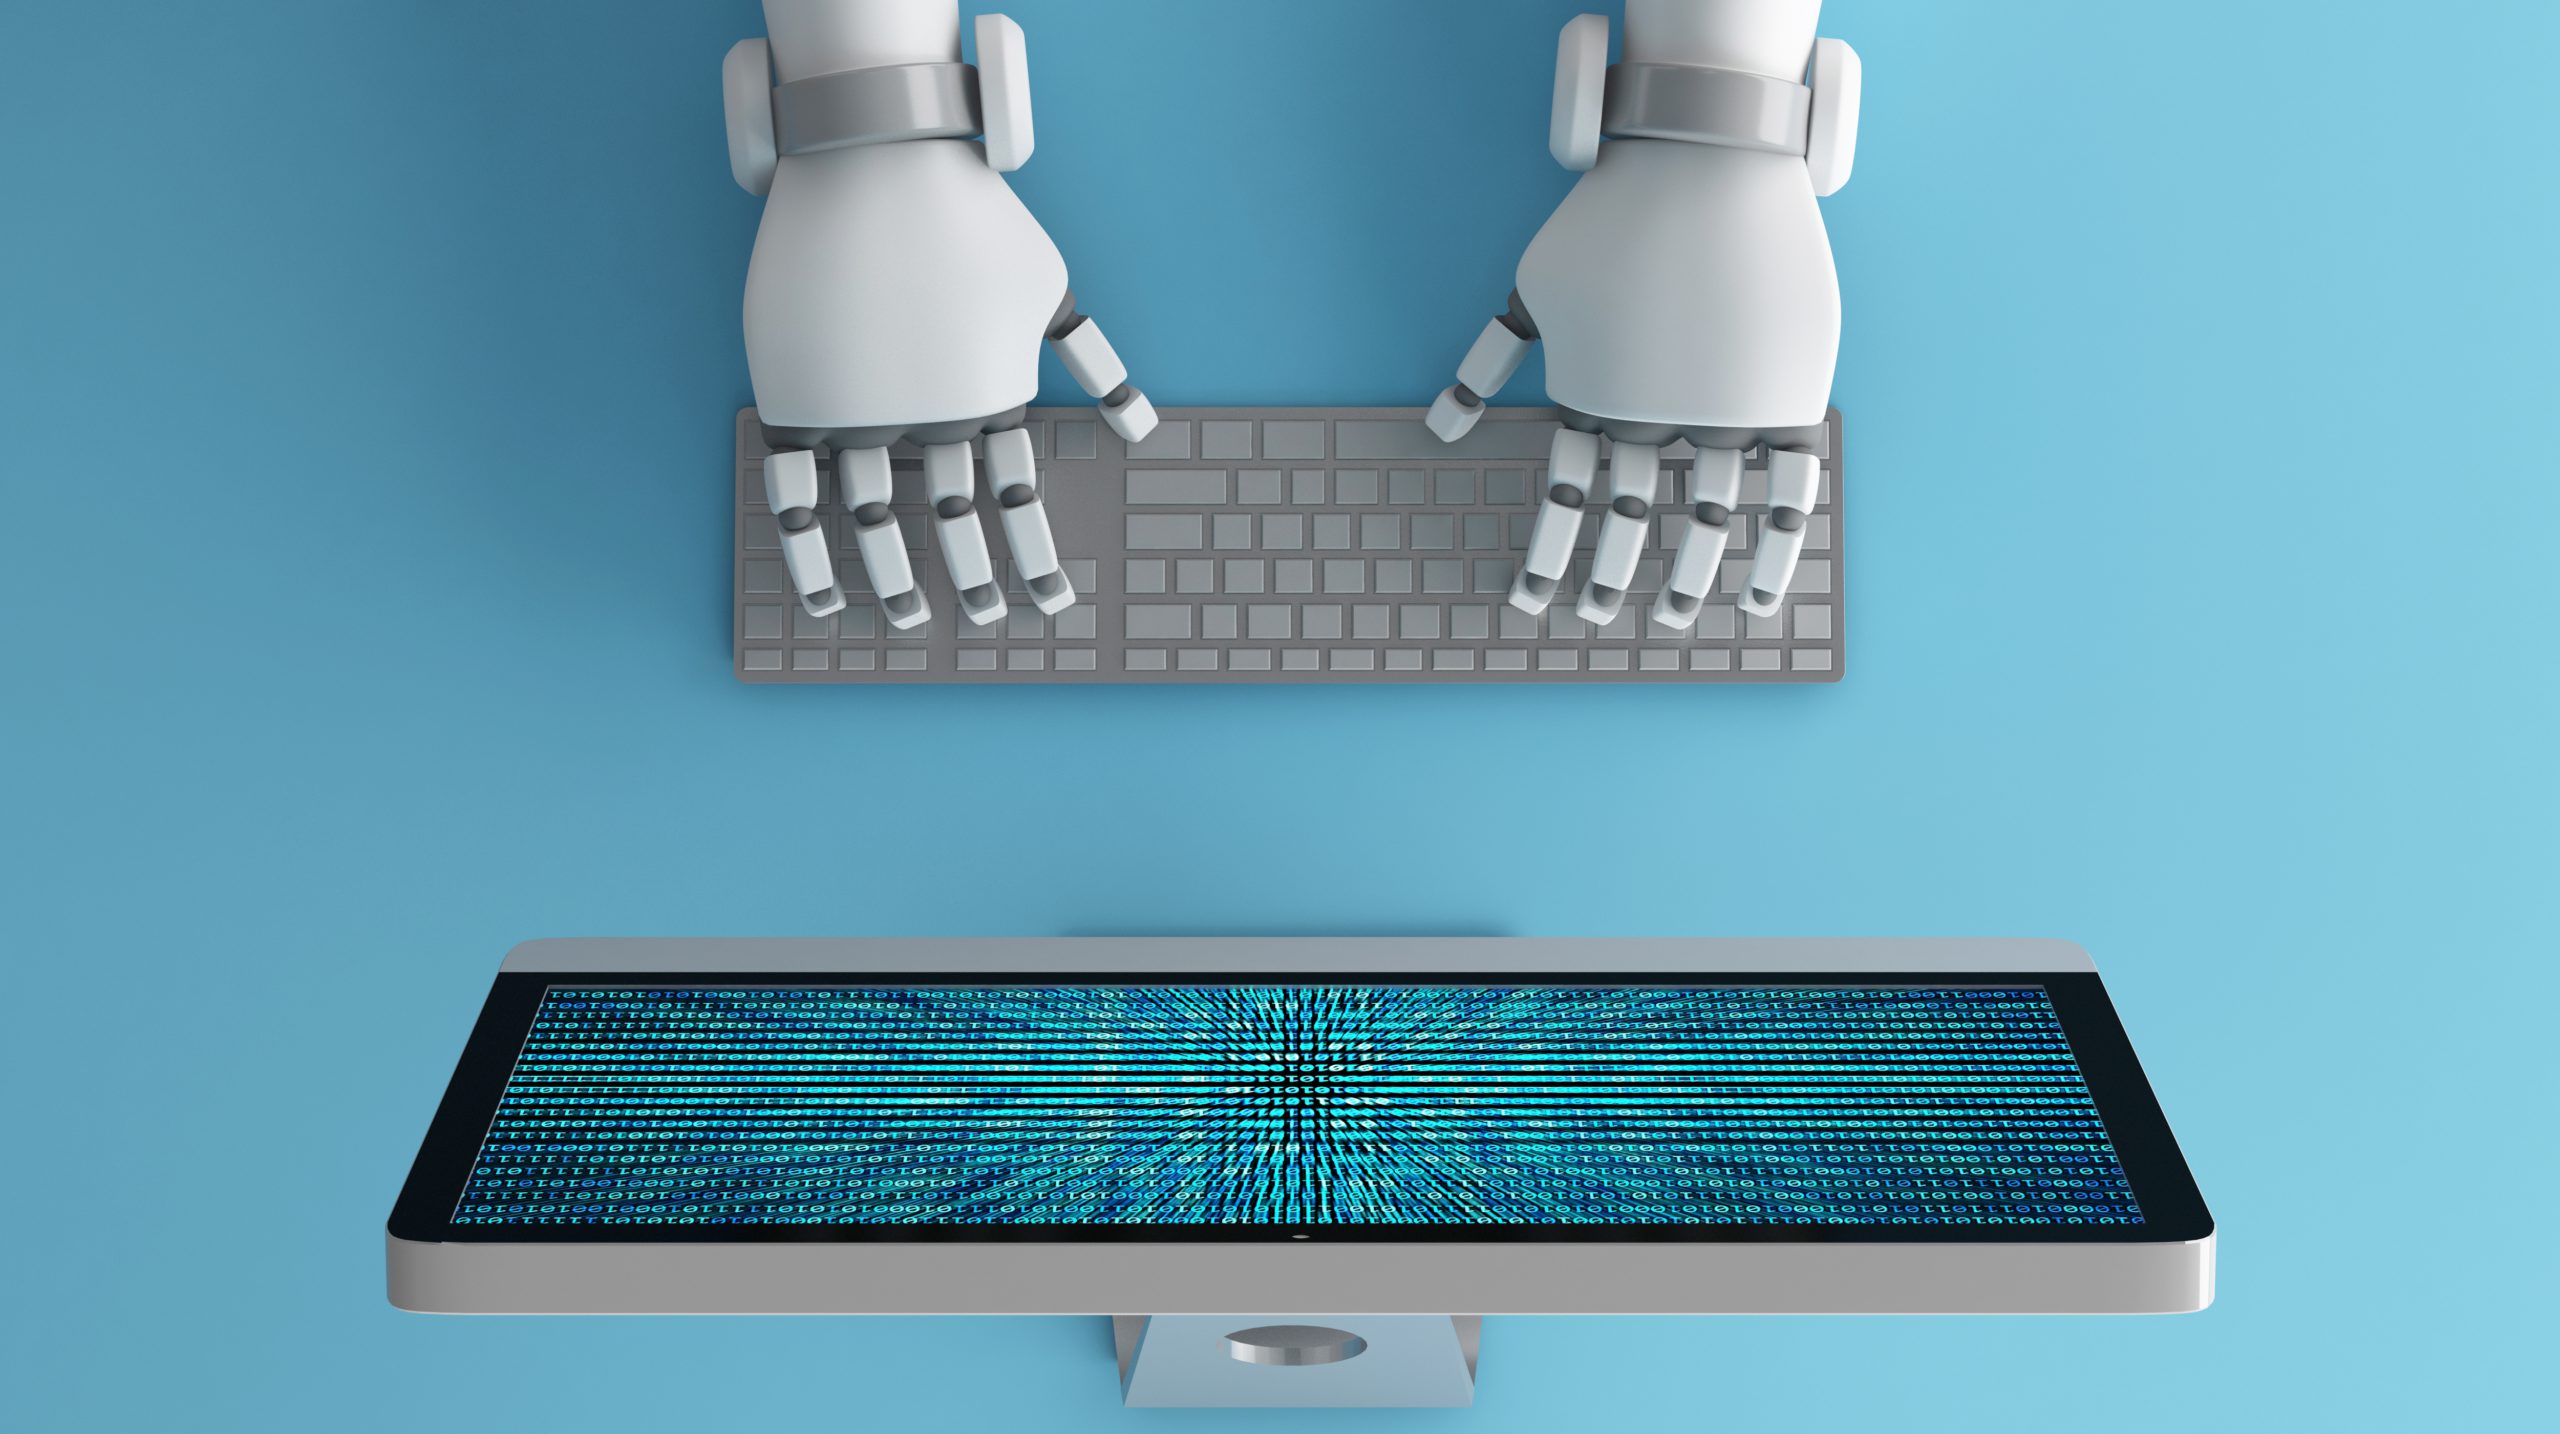 Top view of Robot hands using keyboard in front of a computer monitor with binary number code screen, mock up. Artificial intelligence in digital data futuristic technology concept, 3d illustration